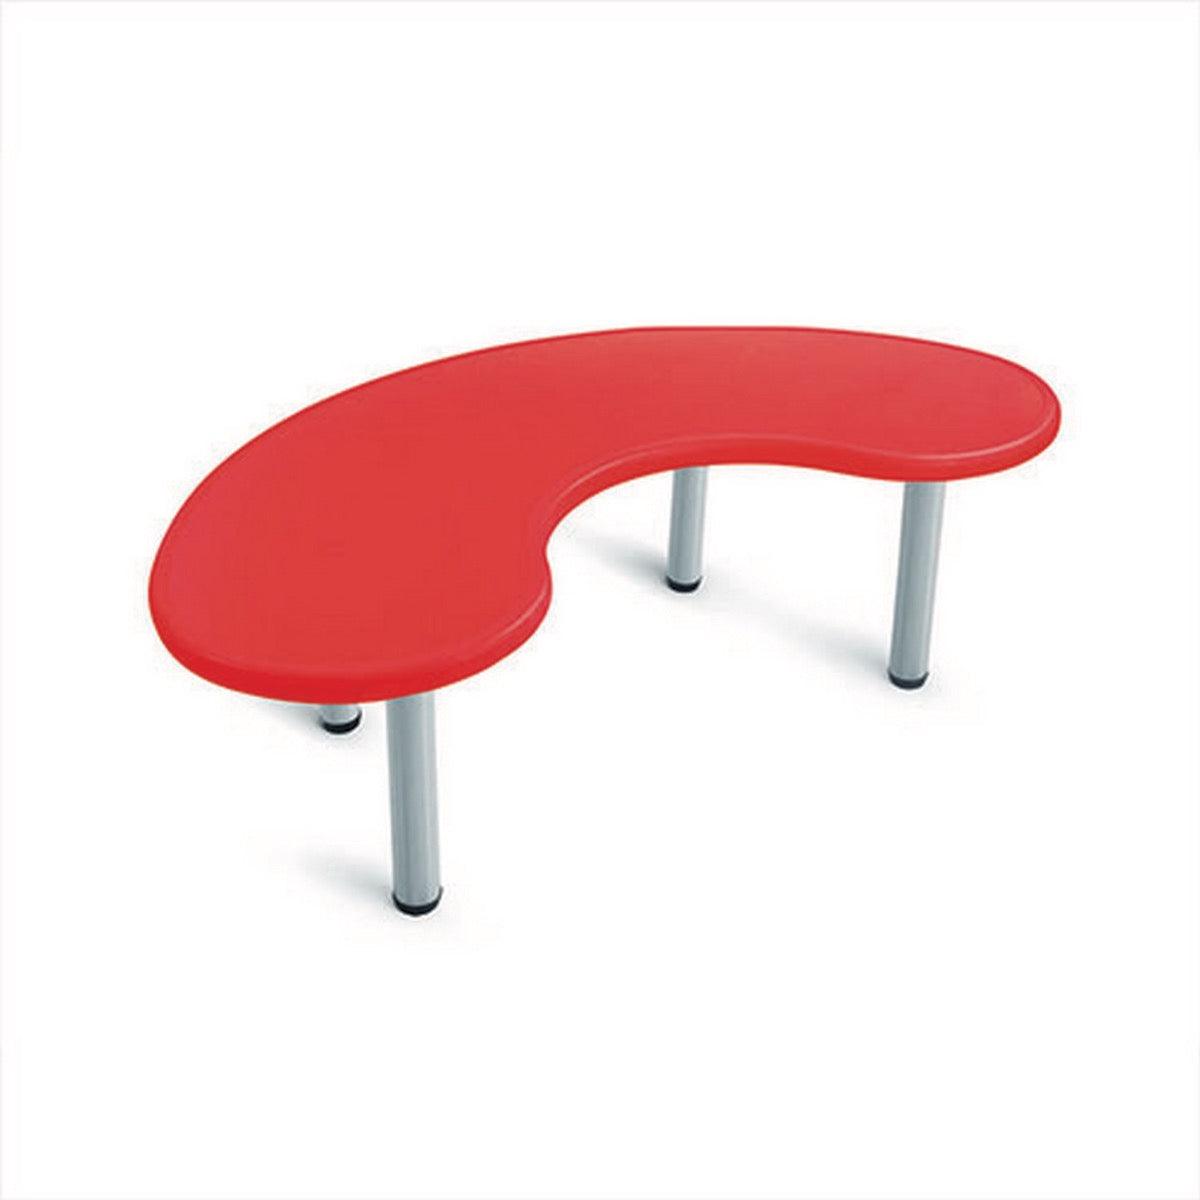 Ok Play Moon Desk Big, Round And Smooth Edges For Safety, Perfect For Home And School, Red, 2 to 4 Years